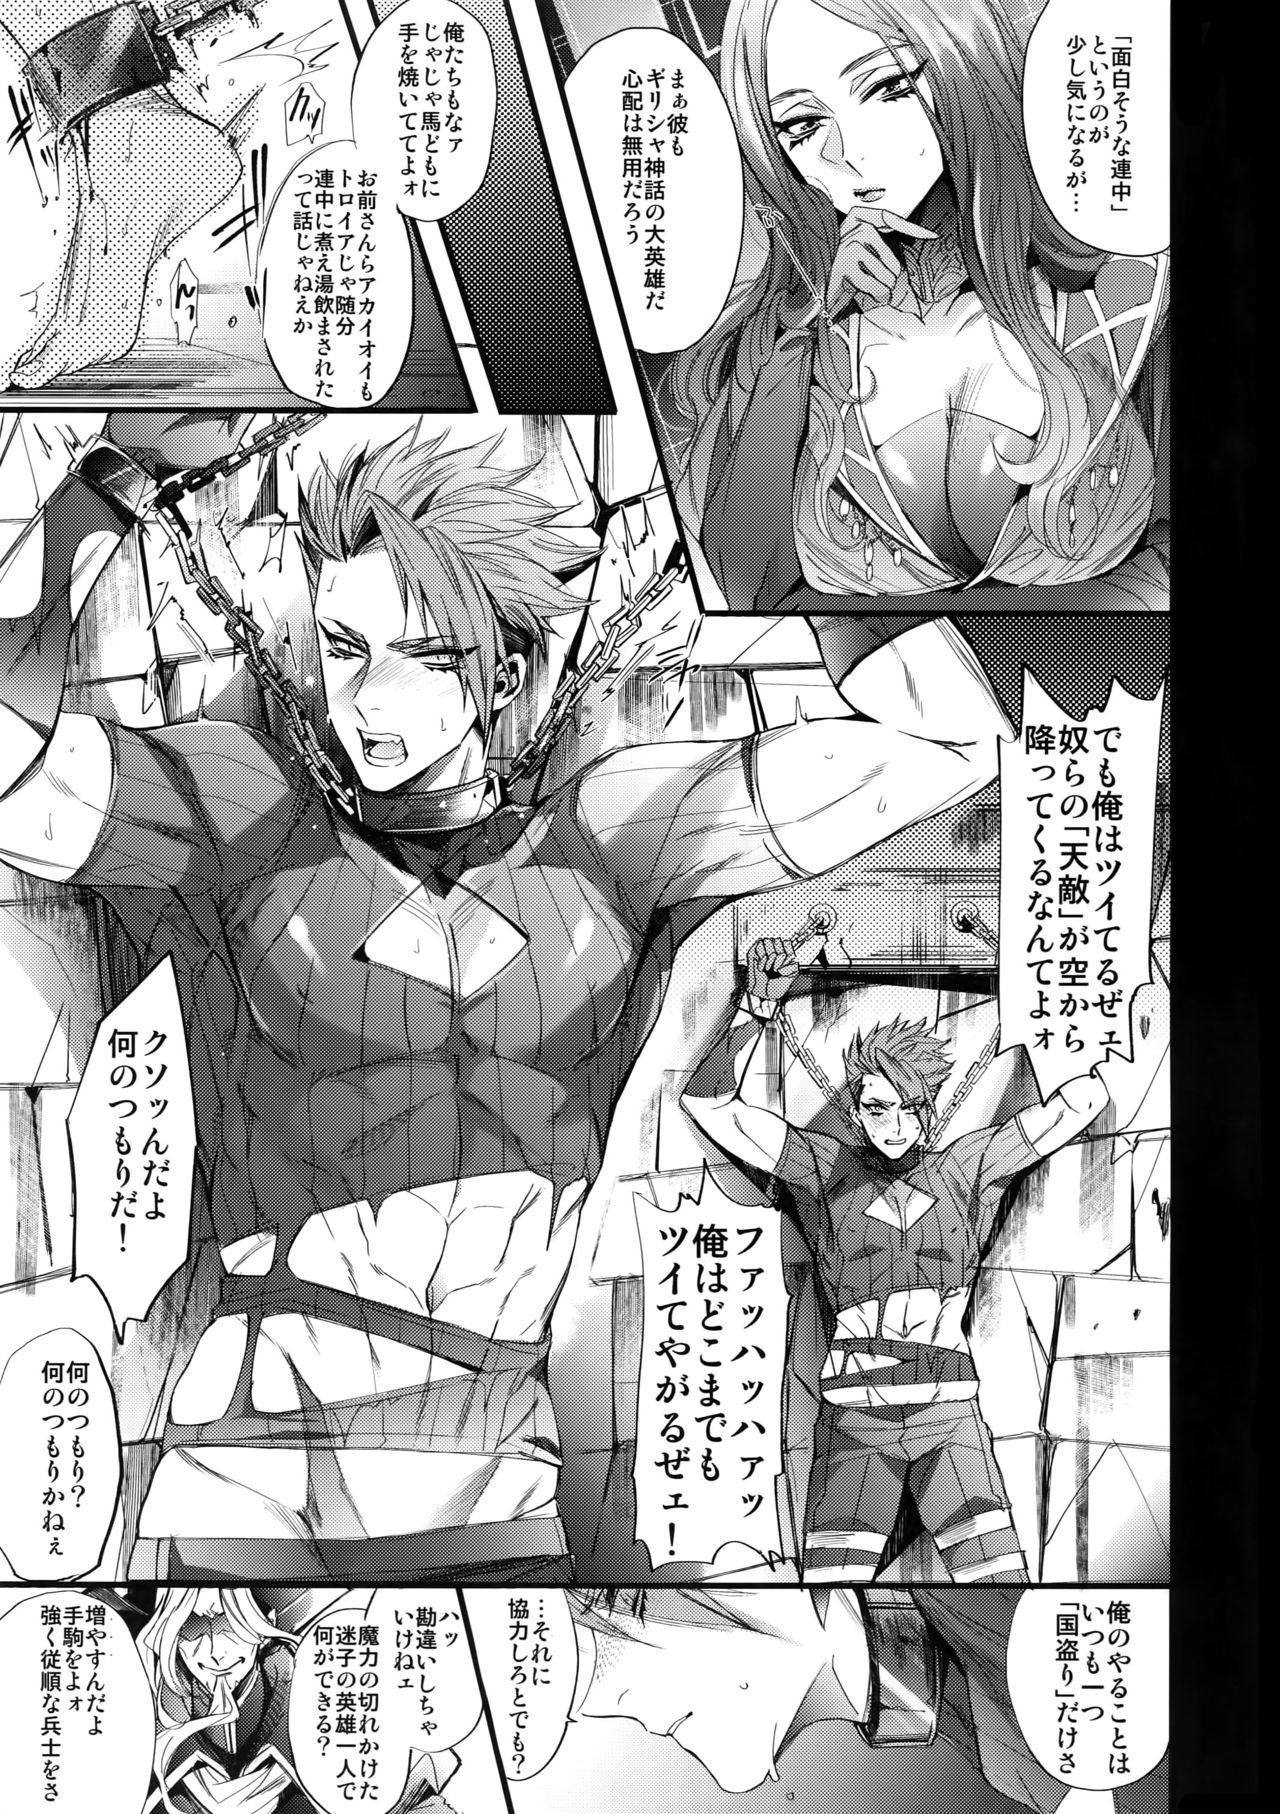 Hardcore Rough Sex From Dusk Till The End - Fate grand order Soles - Page 4